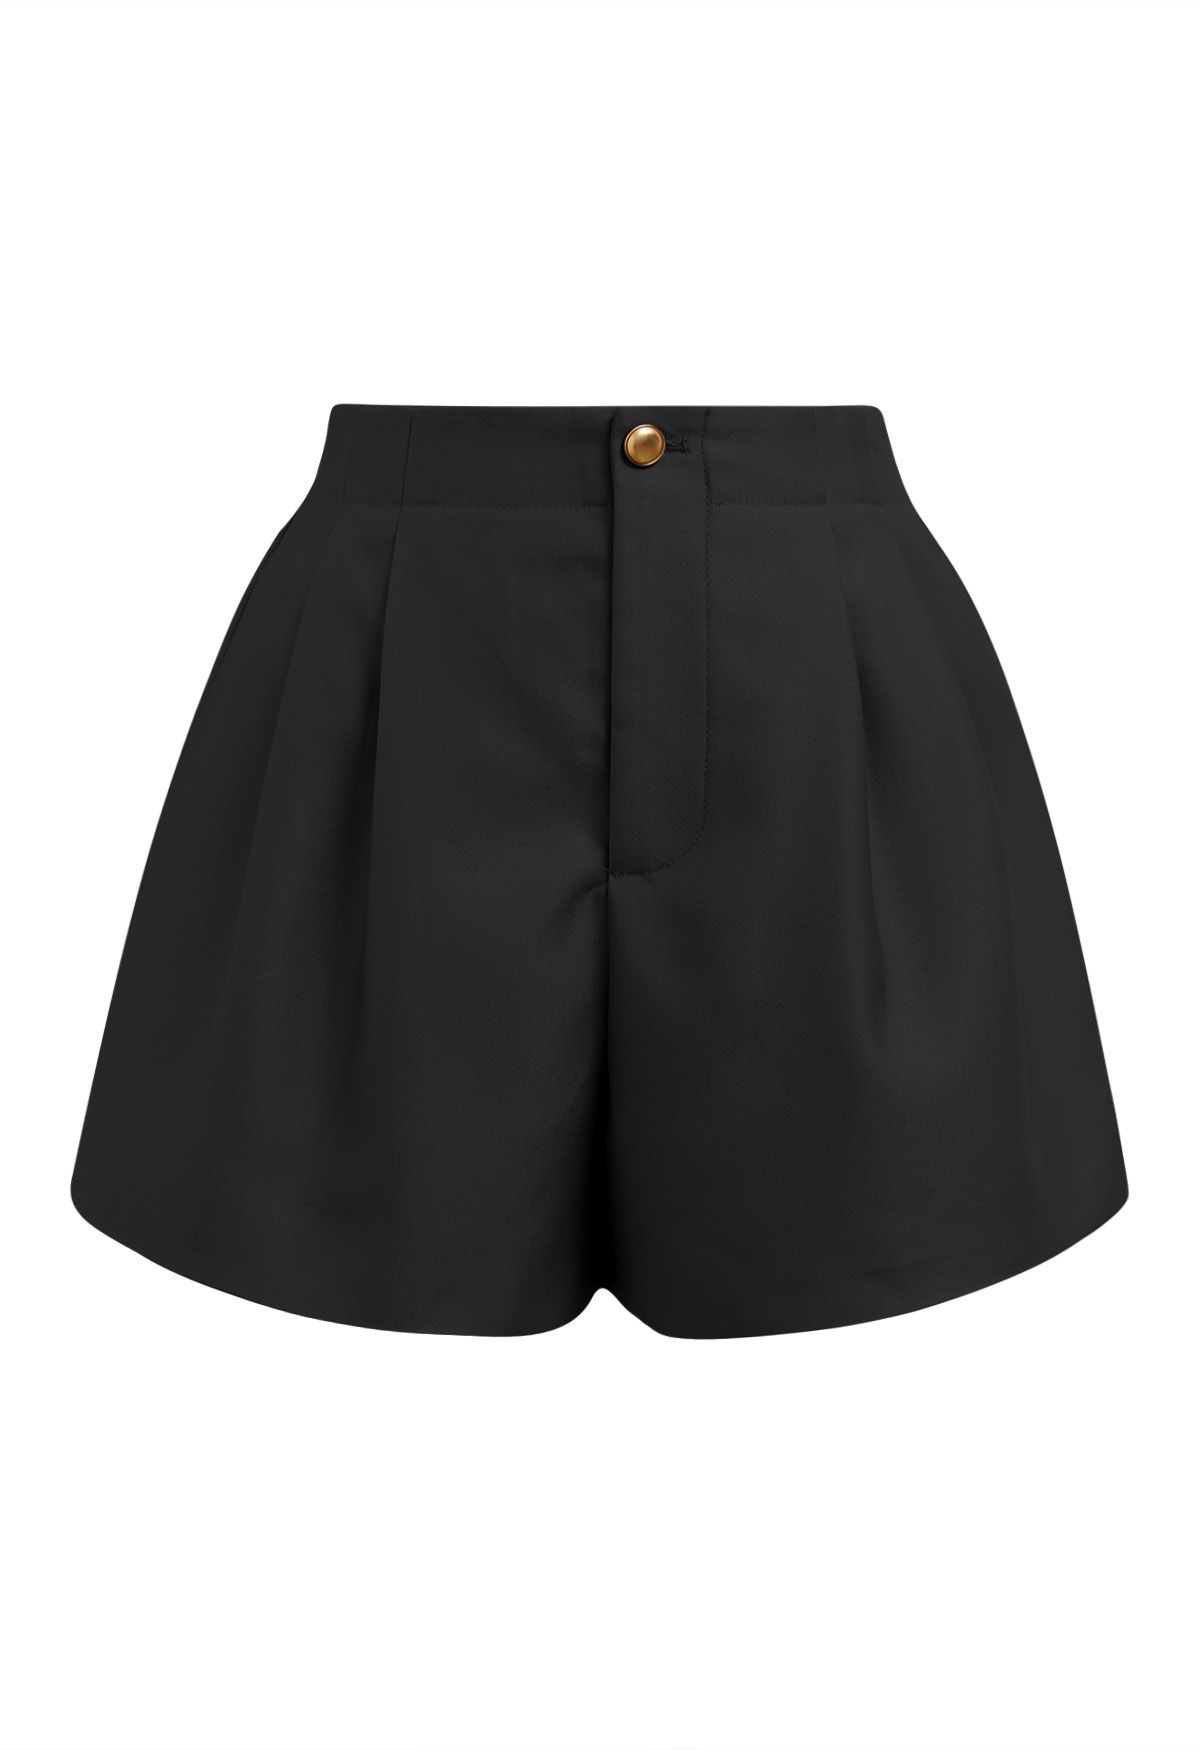 Golden Button Side Pocket Shorts in Black | Chicwish